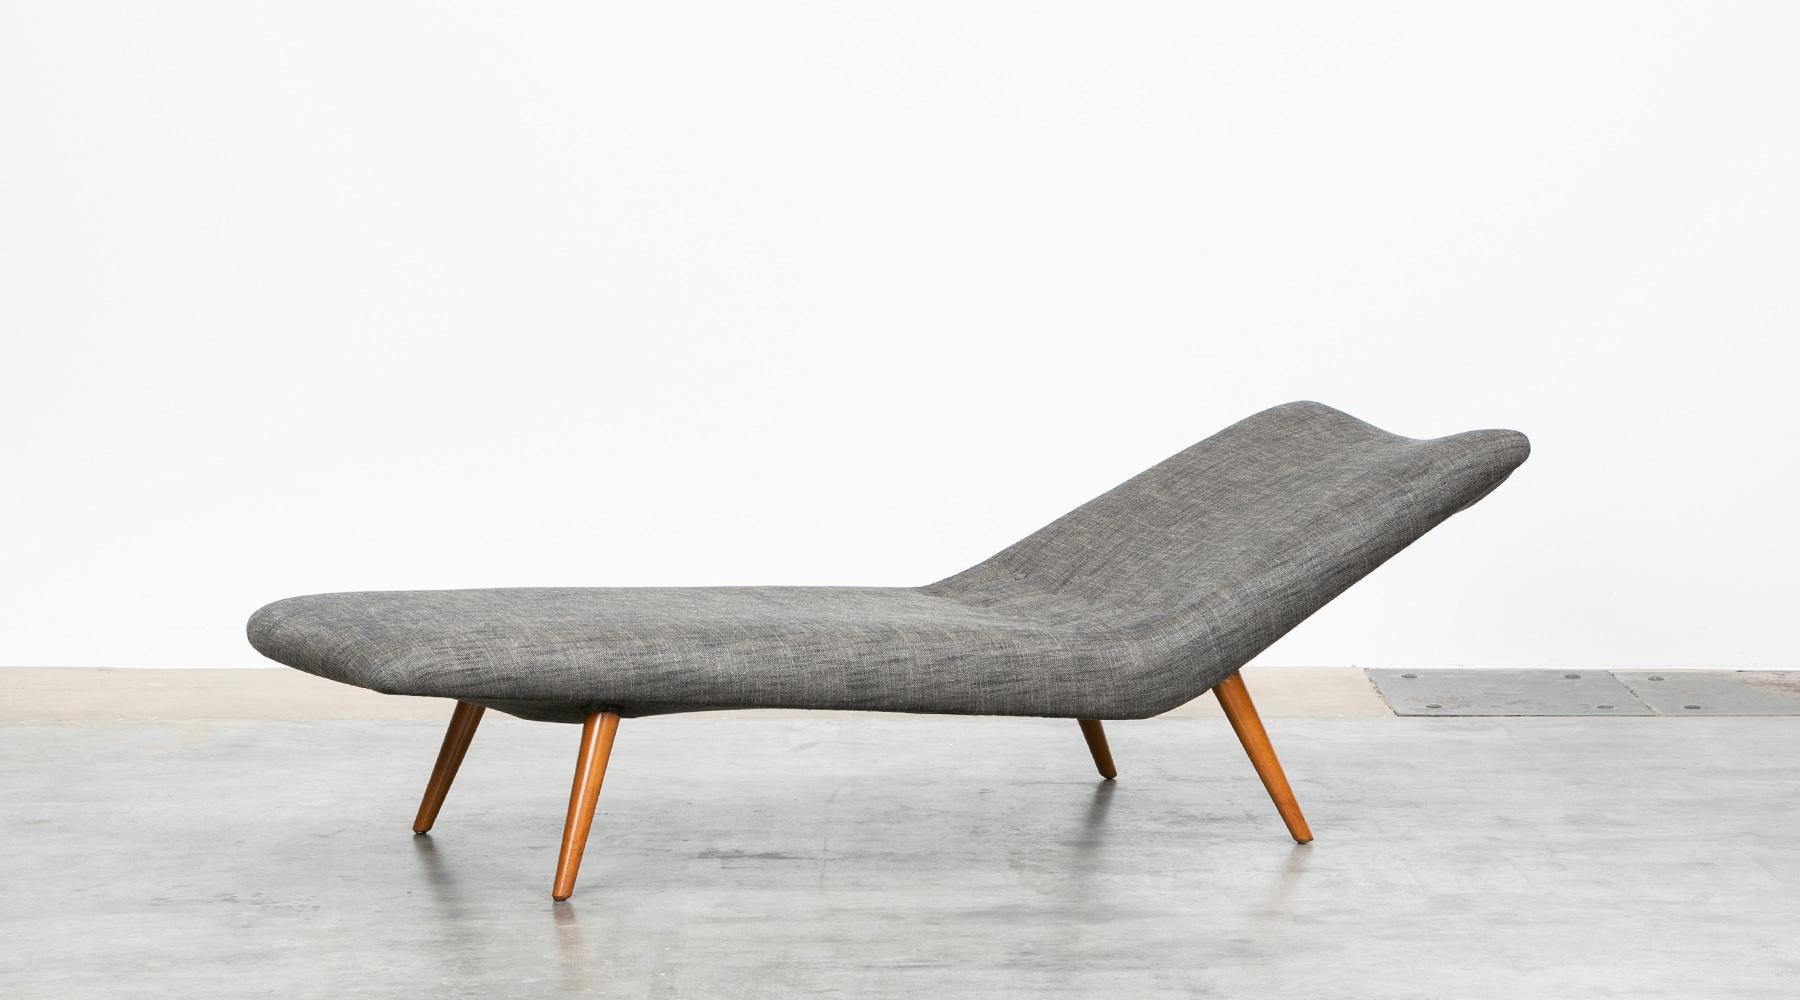 Grey textil, wooden base, Daybed by Theo Ruth for Artifort, Netherland, 1950s.

The daybed comes in clear lines and shape and is designed by Theo Ruth with a slight backrest raise. Our workshop has recently professionally upholstered this piece